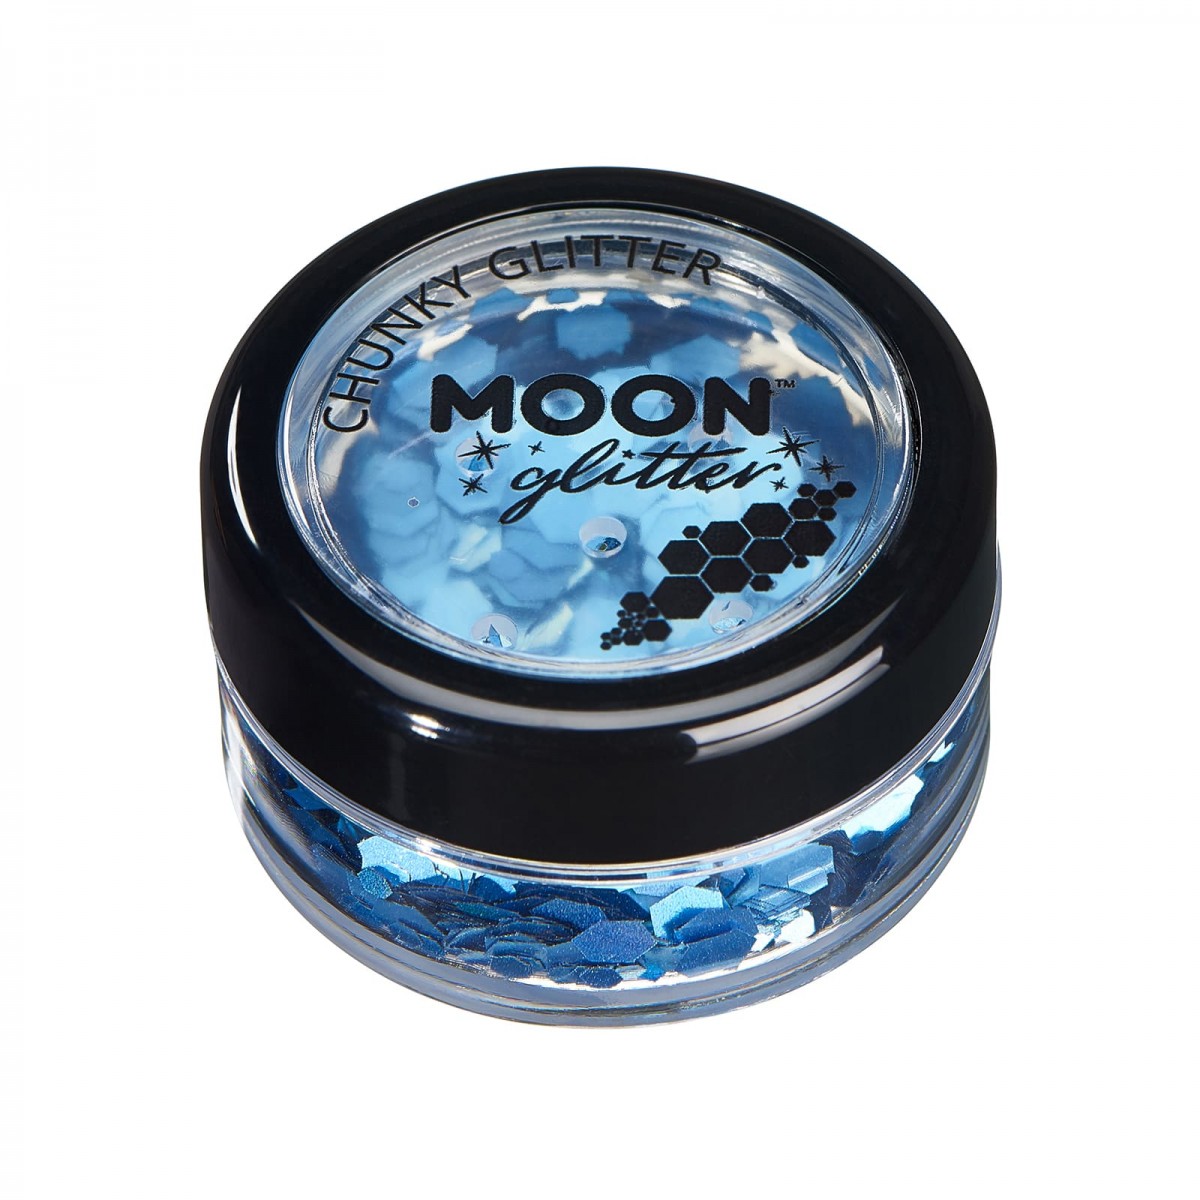 MOON CREATIONS G4 HOLOGRAPHIC CHUNKY GLITTER BLUE 3g